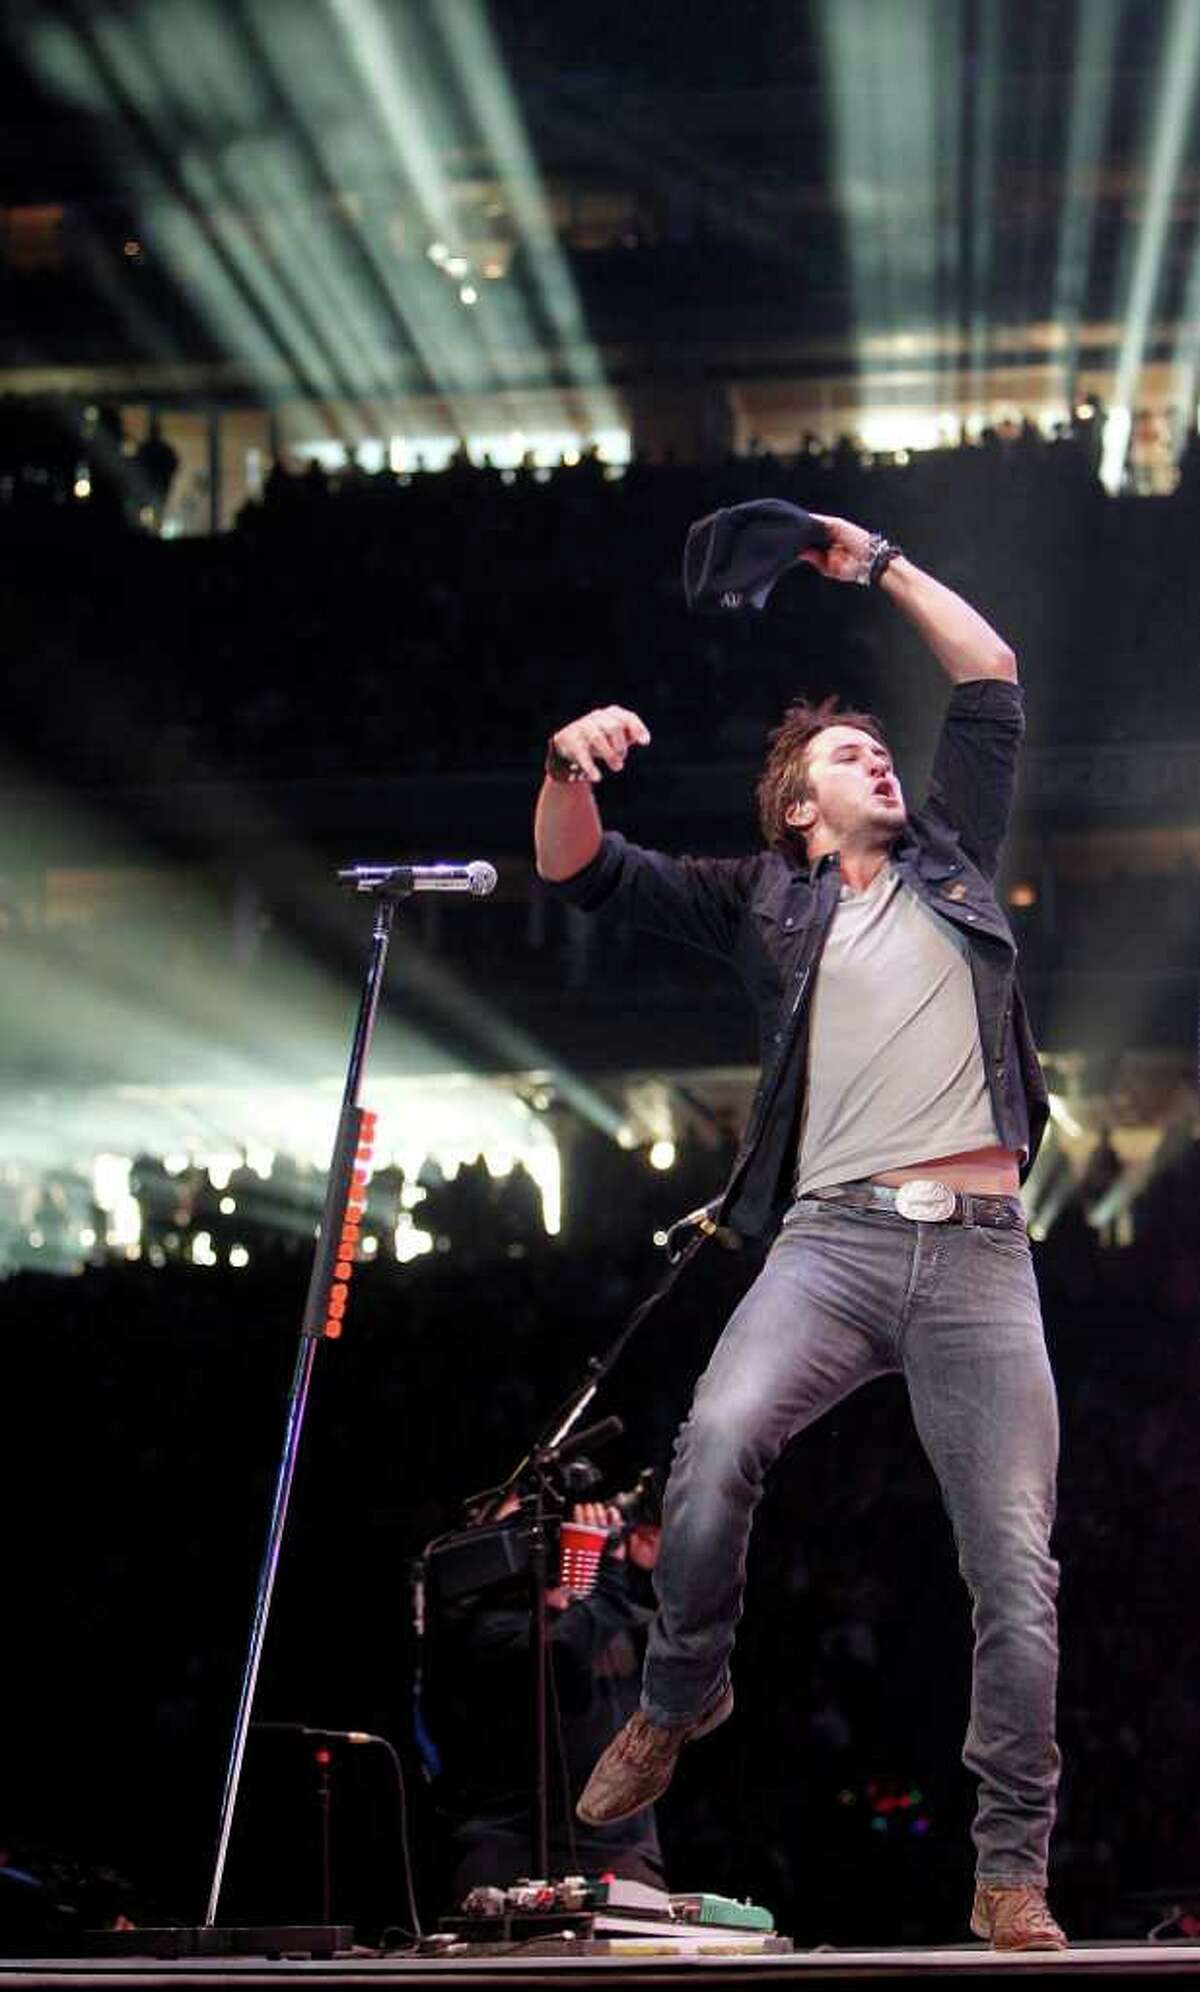 Energy and enthusiasm were in full display Saturday as Luke Bryan made his RodeoHouston debut before 71,007 fans.